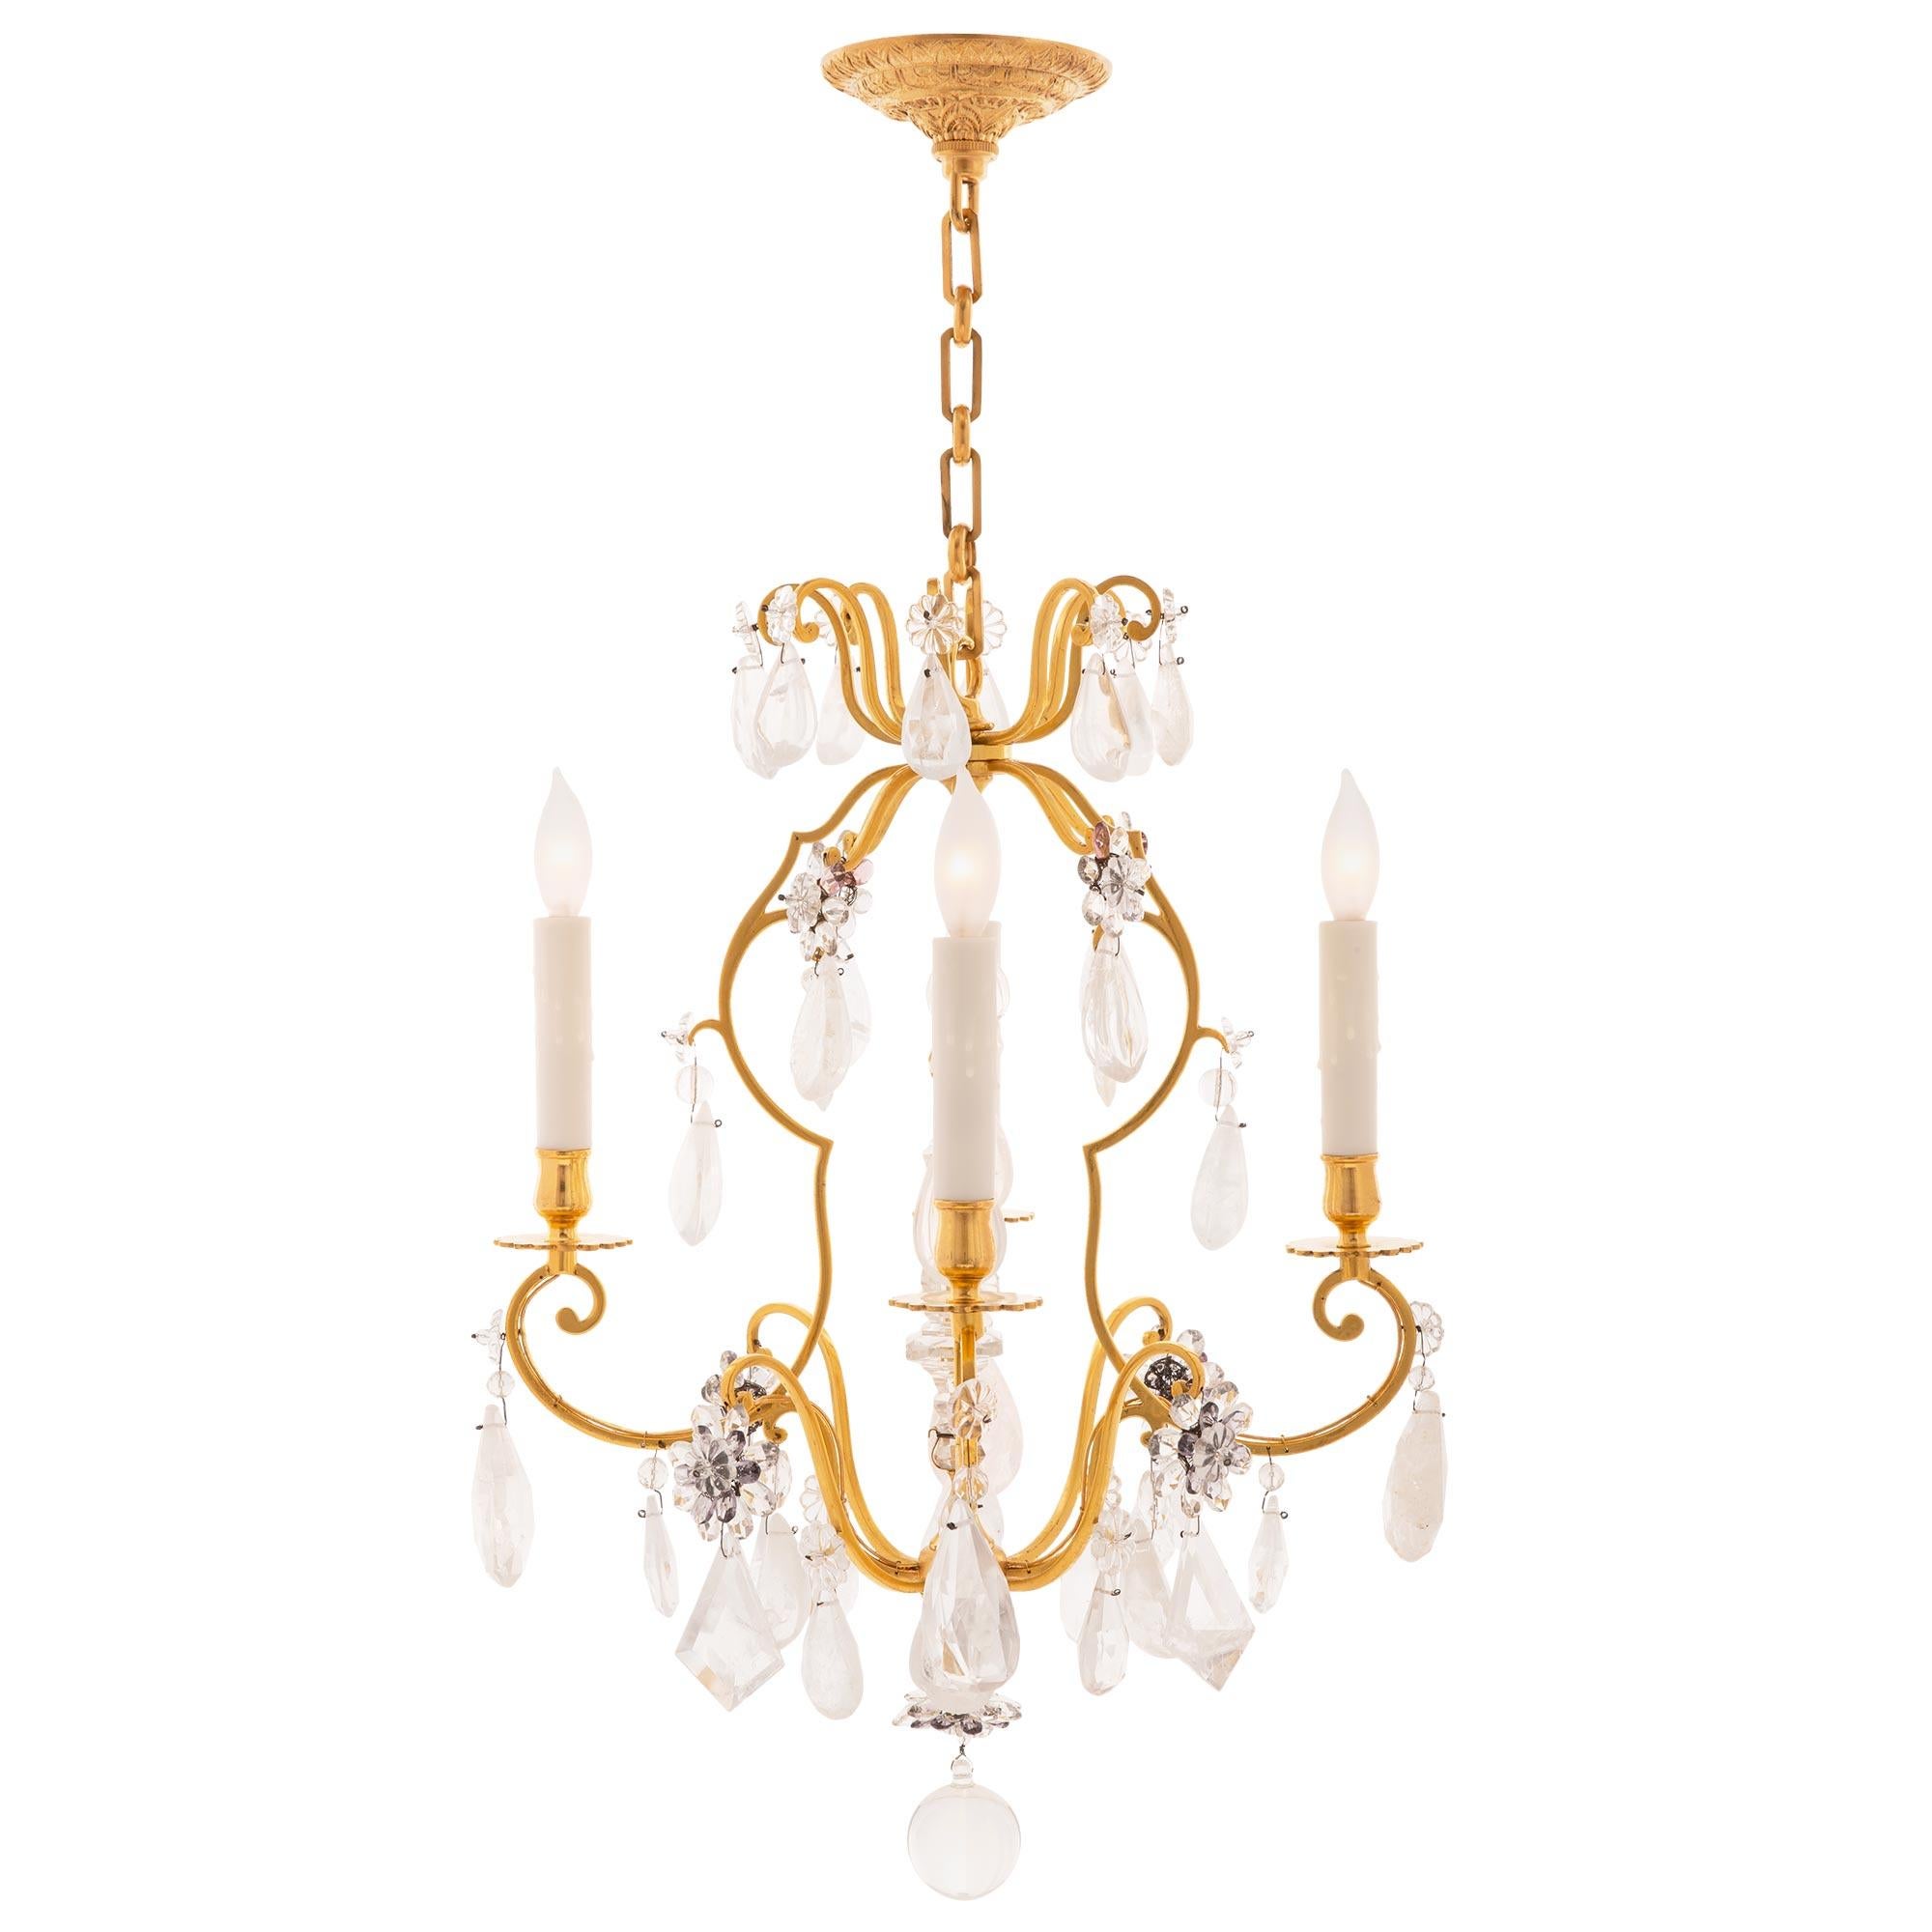 A charming and most decorative pair of French early 19th century Louis XVI st. ormolu, rock crystal, and colored glass chandeliers. Each four arm chandelier is centered by a beautiful solid crystal ball with charming floral crystals and amethyst